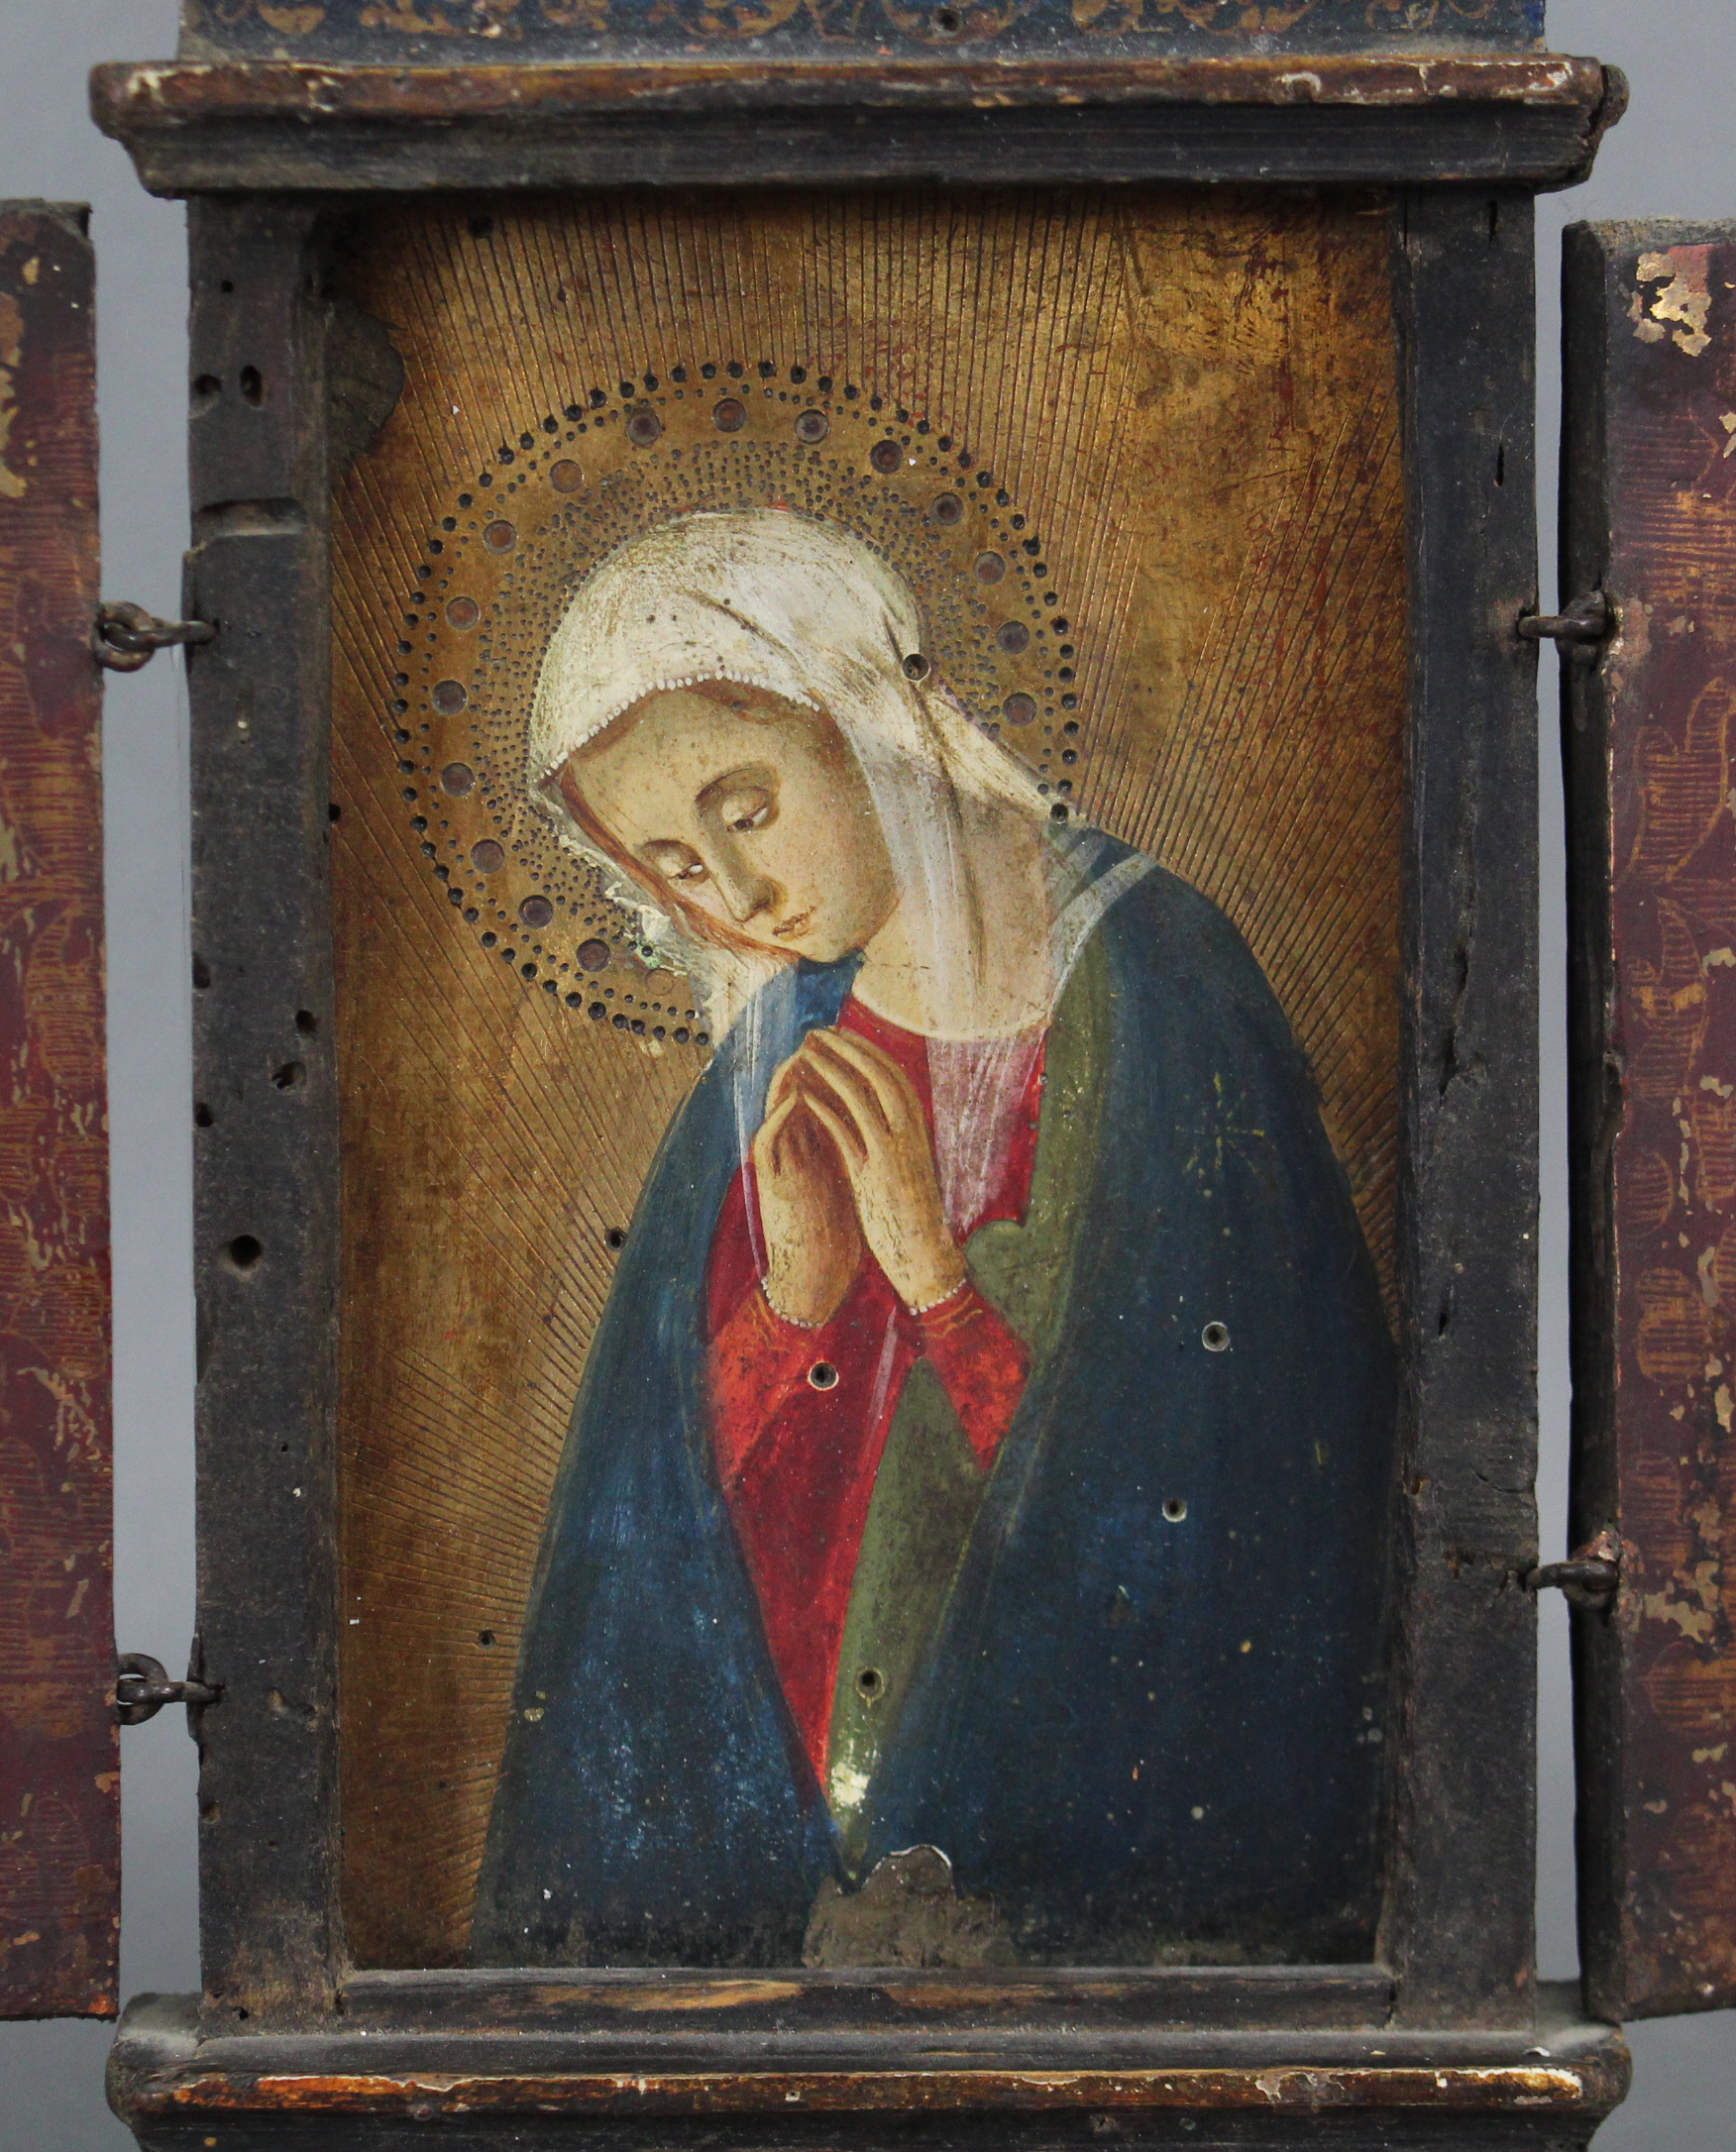 An Italian renaissance style tabernacle with half-length portrait of the Madonna painted in oils & - Image 2 of 4